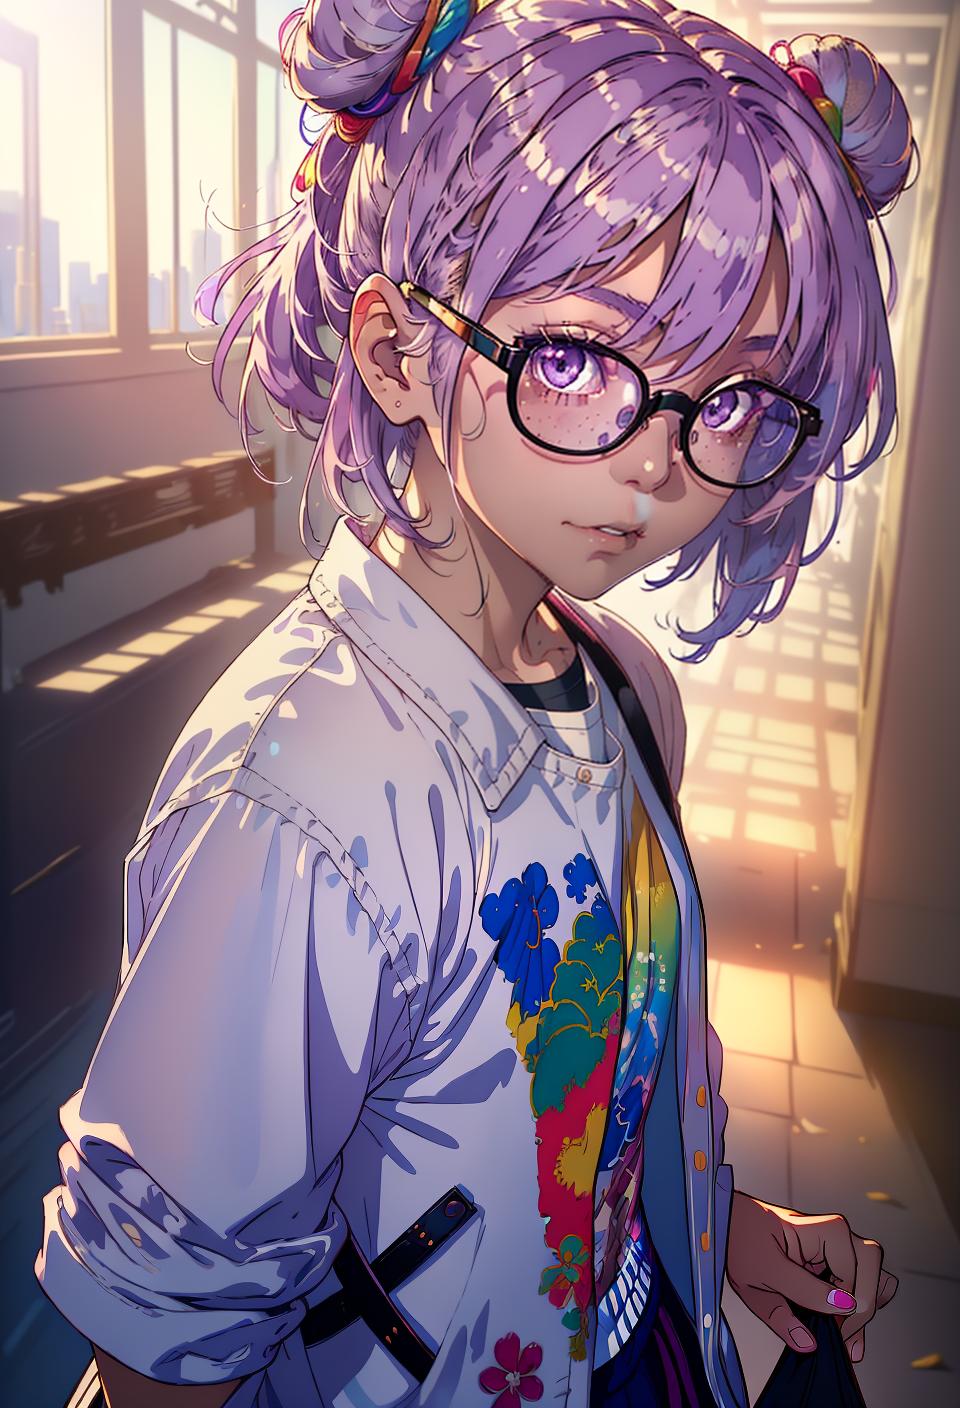  ((trending, highres, masterpiece, cinematic shot)), 1girl, young, female casual wear, ruins scene, short messy light purple hair, hair in Chinese buns,  rainbow-colored eyes, calm personality, mischievous expression, glasses, tanned skin, chaotic, toned